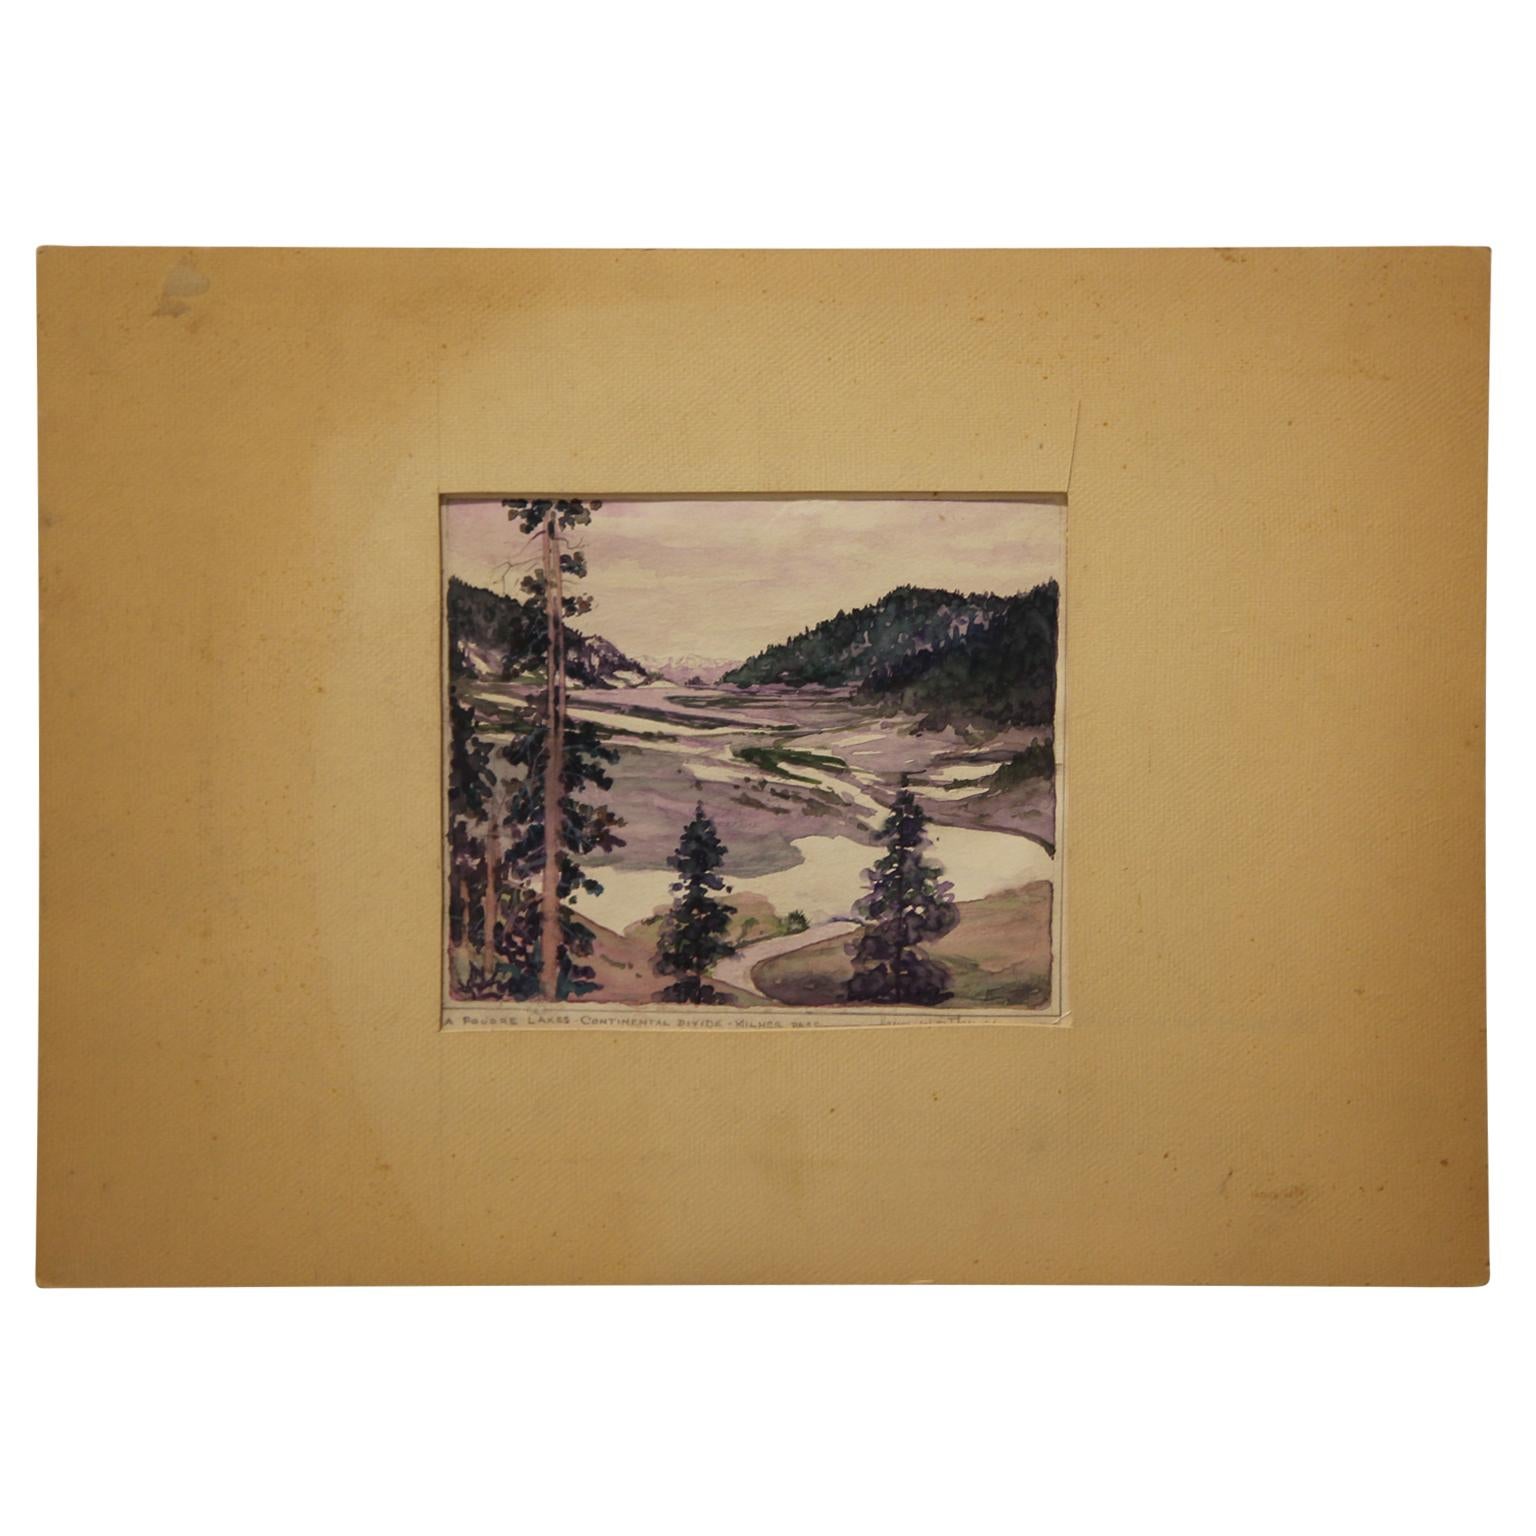 "A Poudre Lakes - Continental Divide - Milner Pass" Early Watercolor Landscape